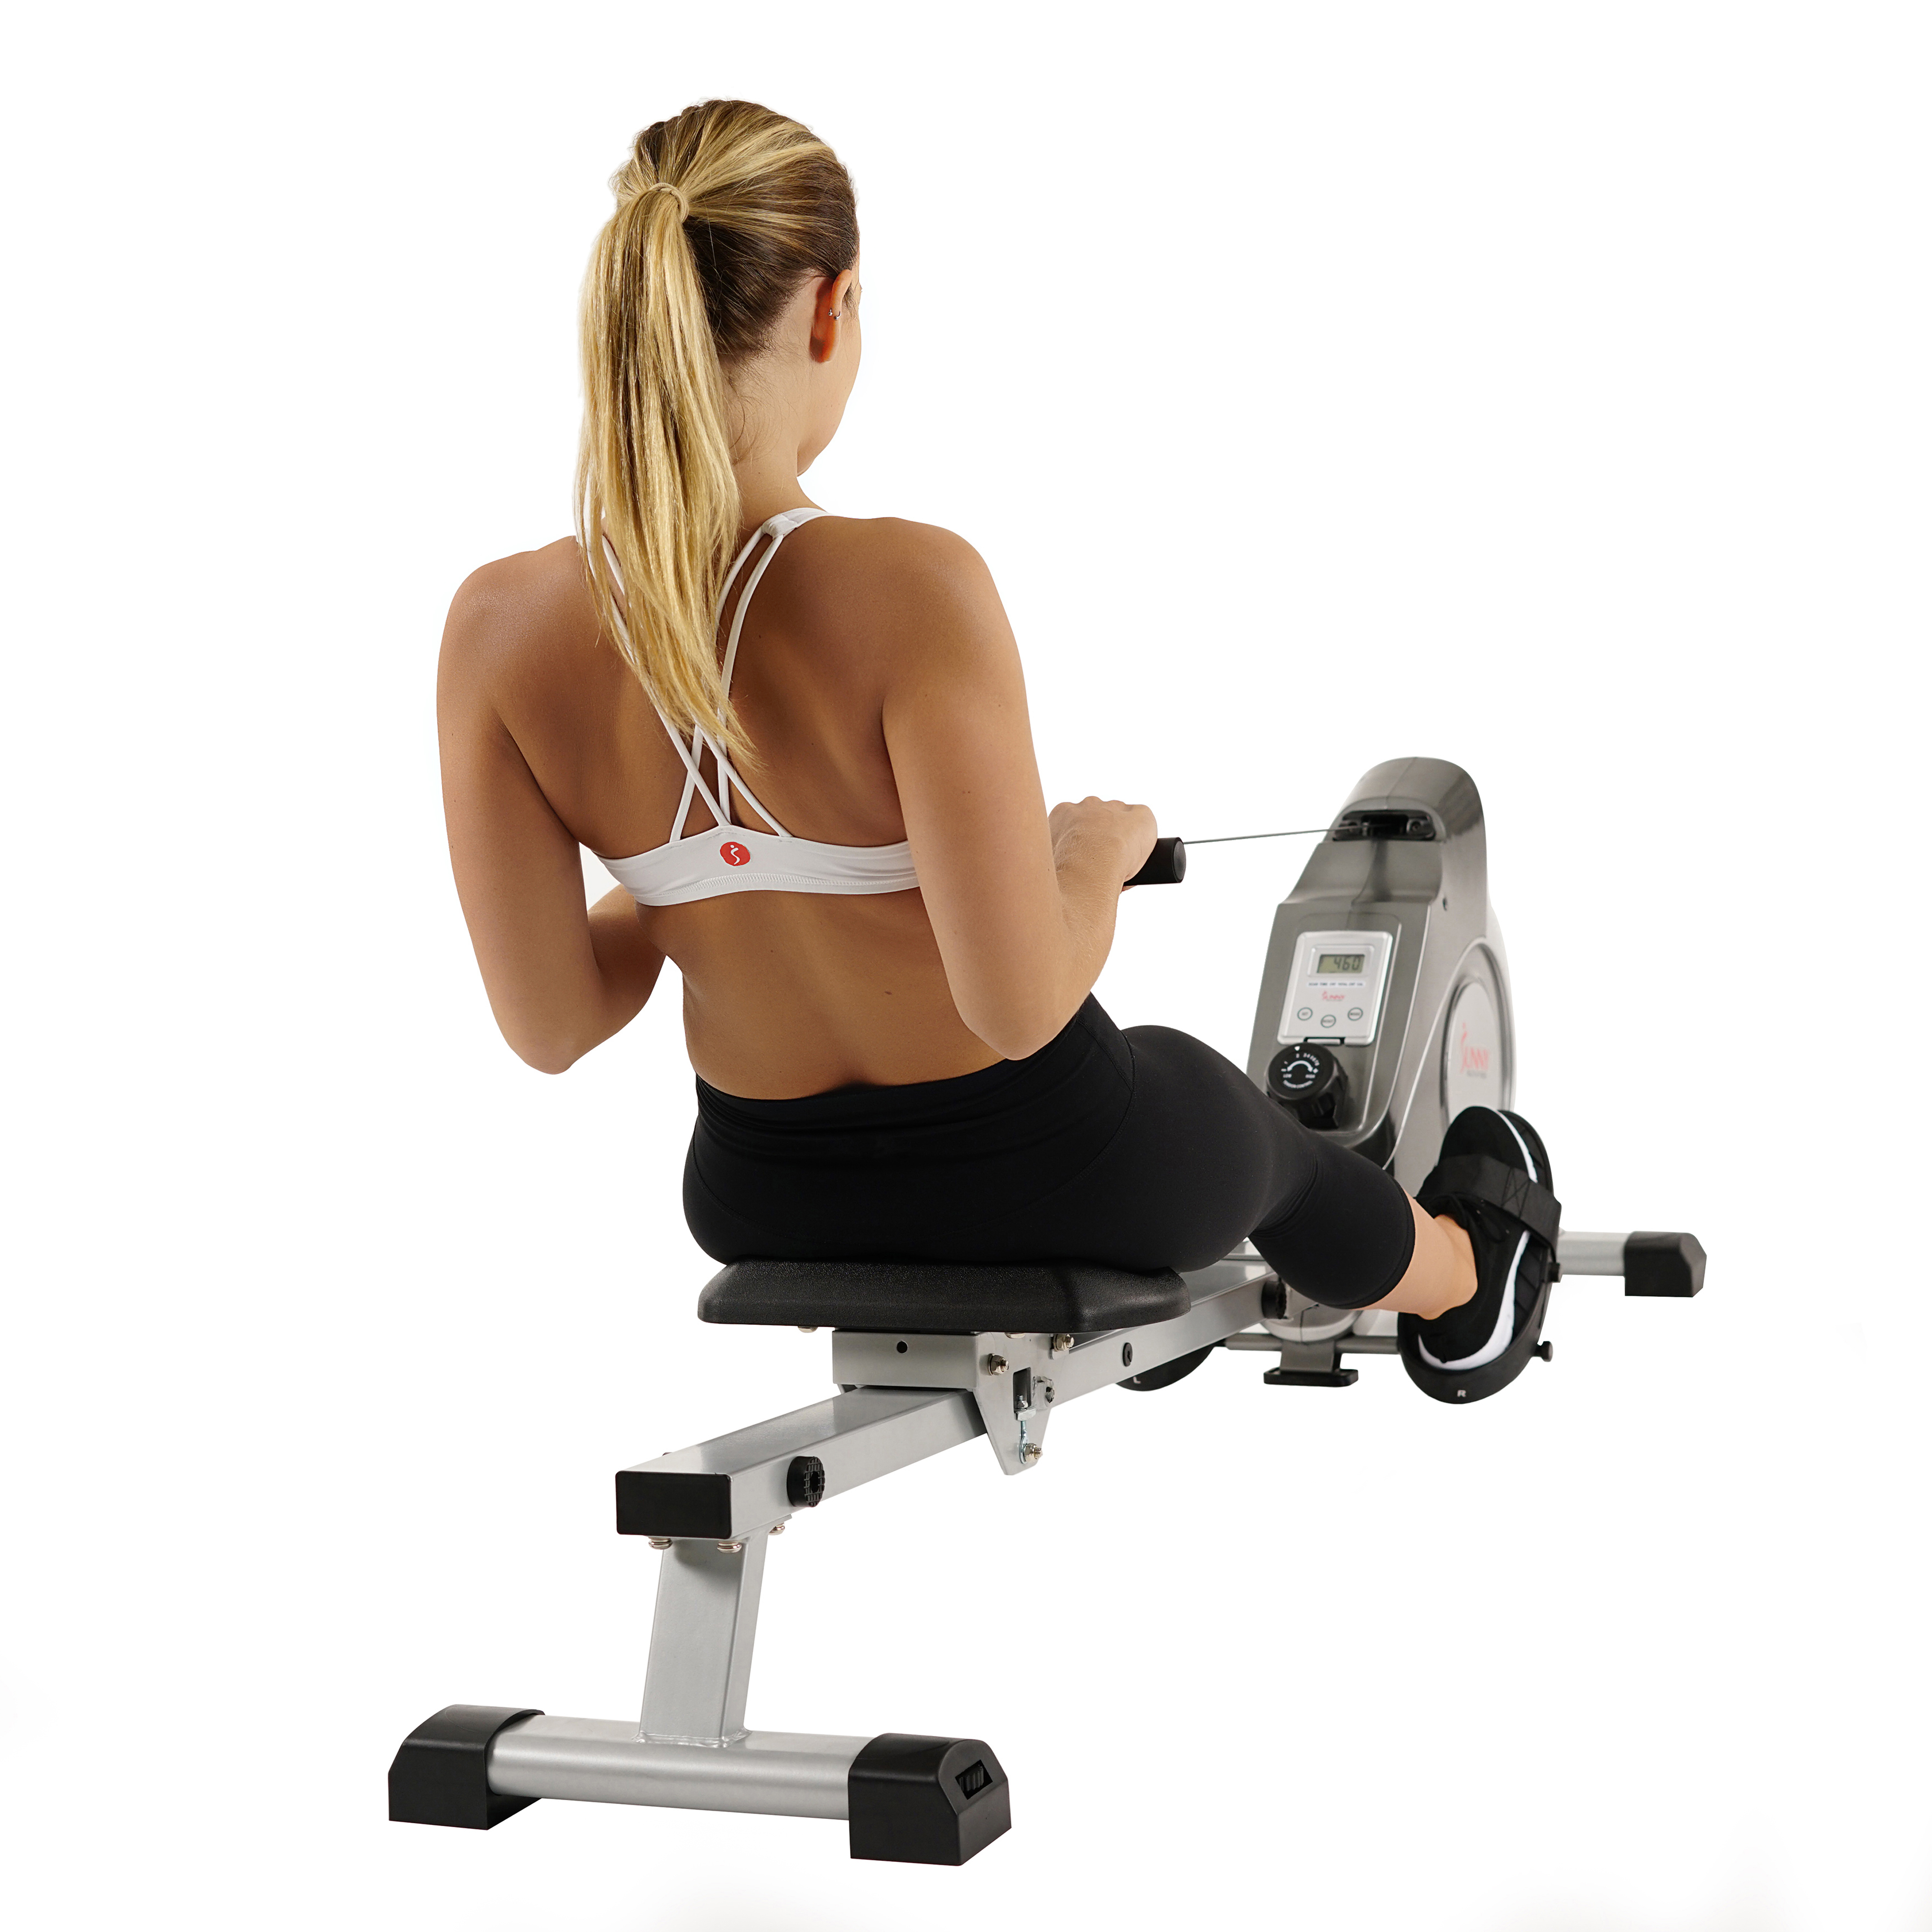 Sunny Health & Fitness Smart Magnetic Rowing Machine with Extended Slide Rail with Optional Exclusive SunnyFit® App Enhanced Bluetooth Connectivity SF-RW5515 - image 10 of 11